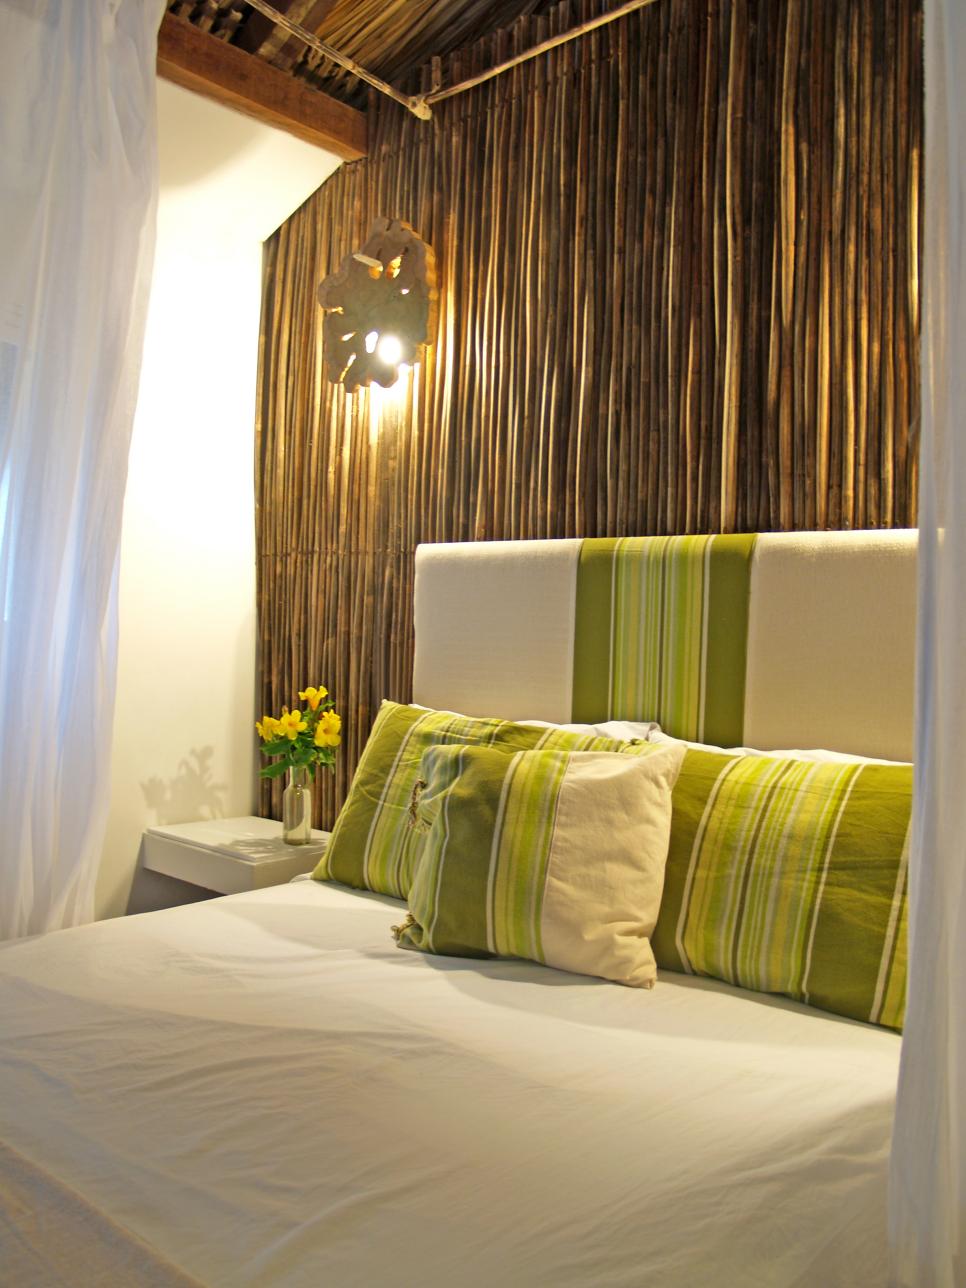 White Bed With Green Striped Headboard Against Rattan Wall